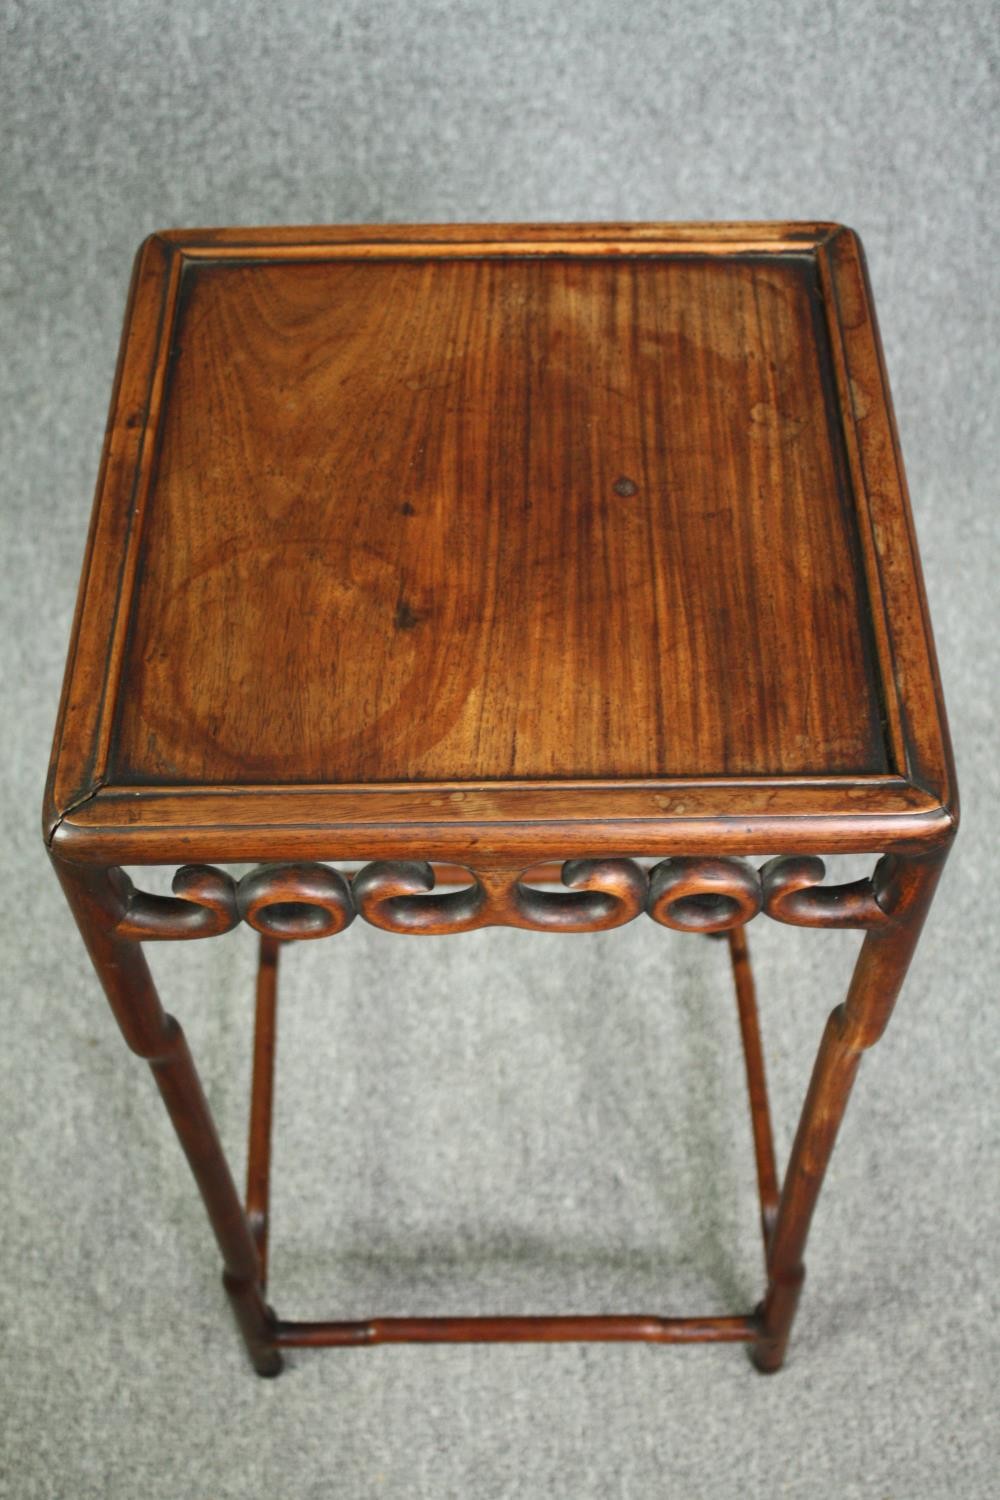 Urn or plant stand, Chinese hardwood. H.73 W.36 D.36cm. - Image 3 of 4